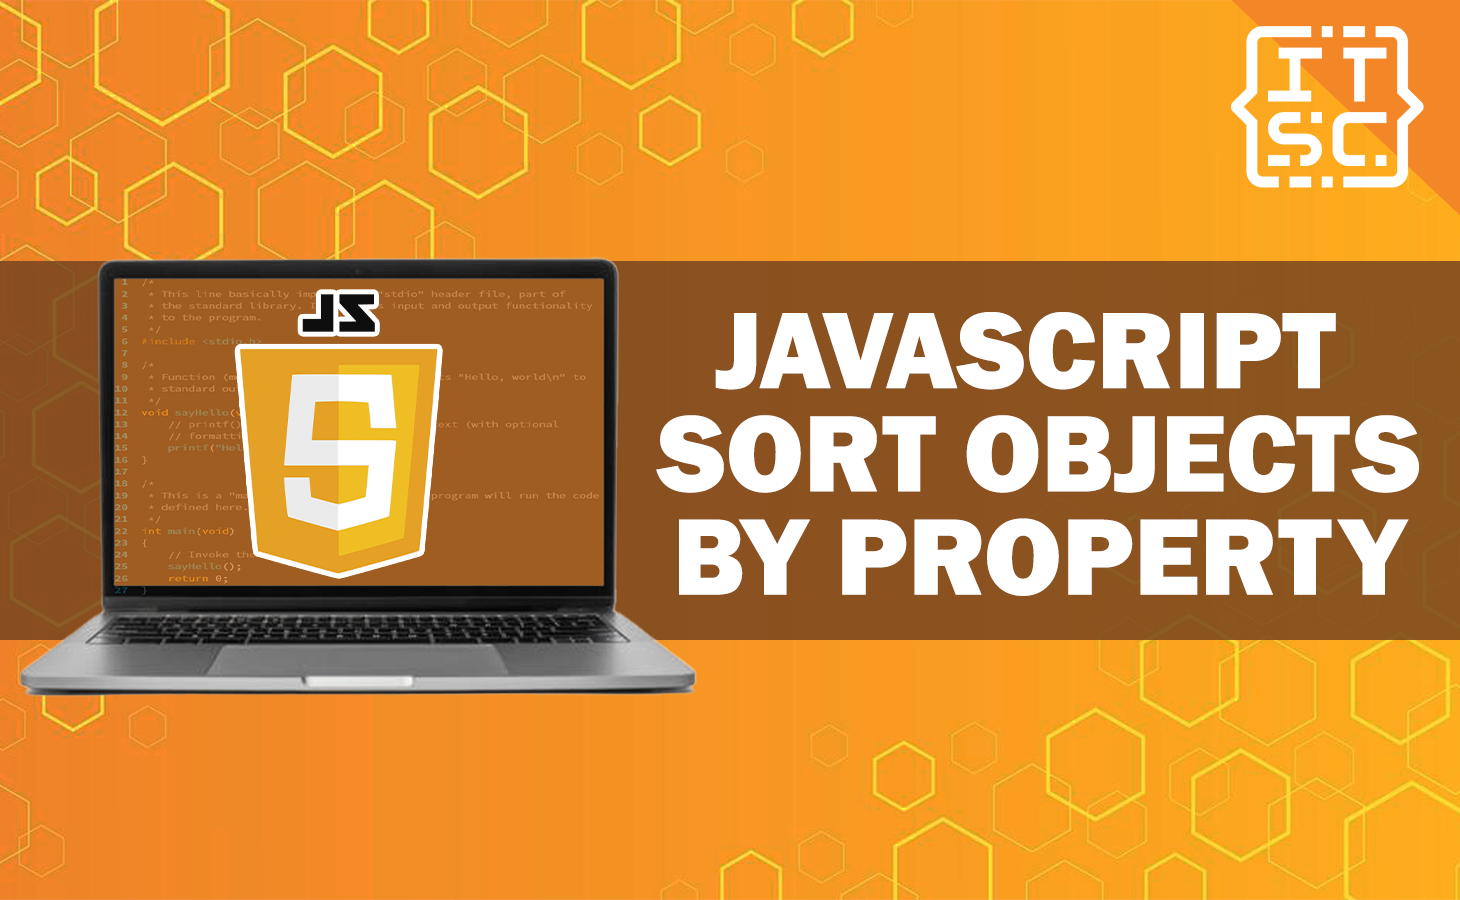 JavaScript Sort Objects by Property